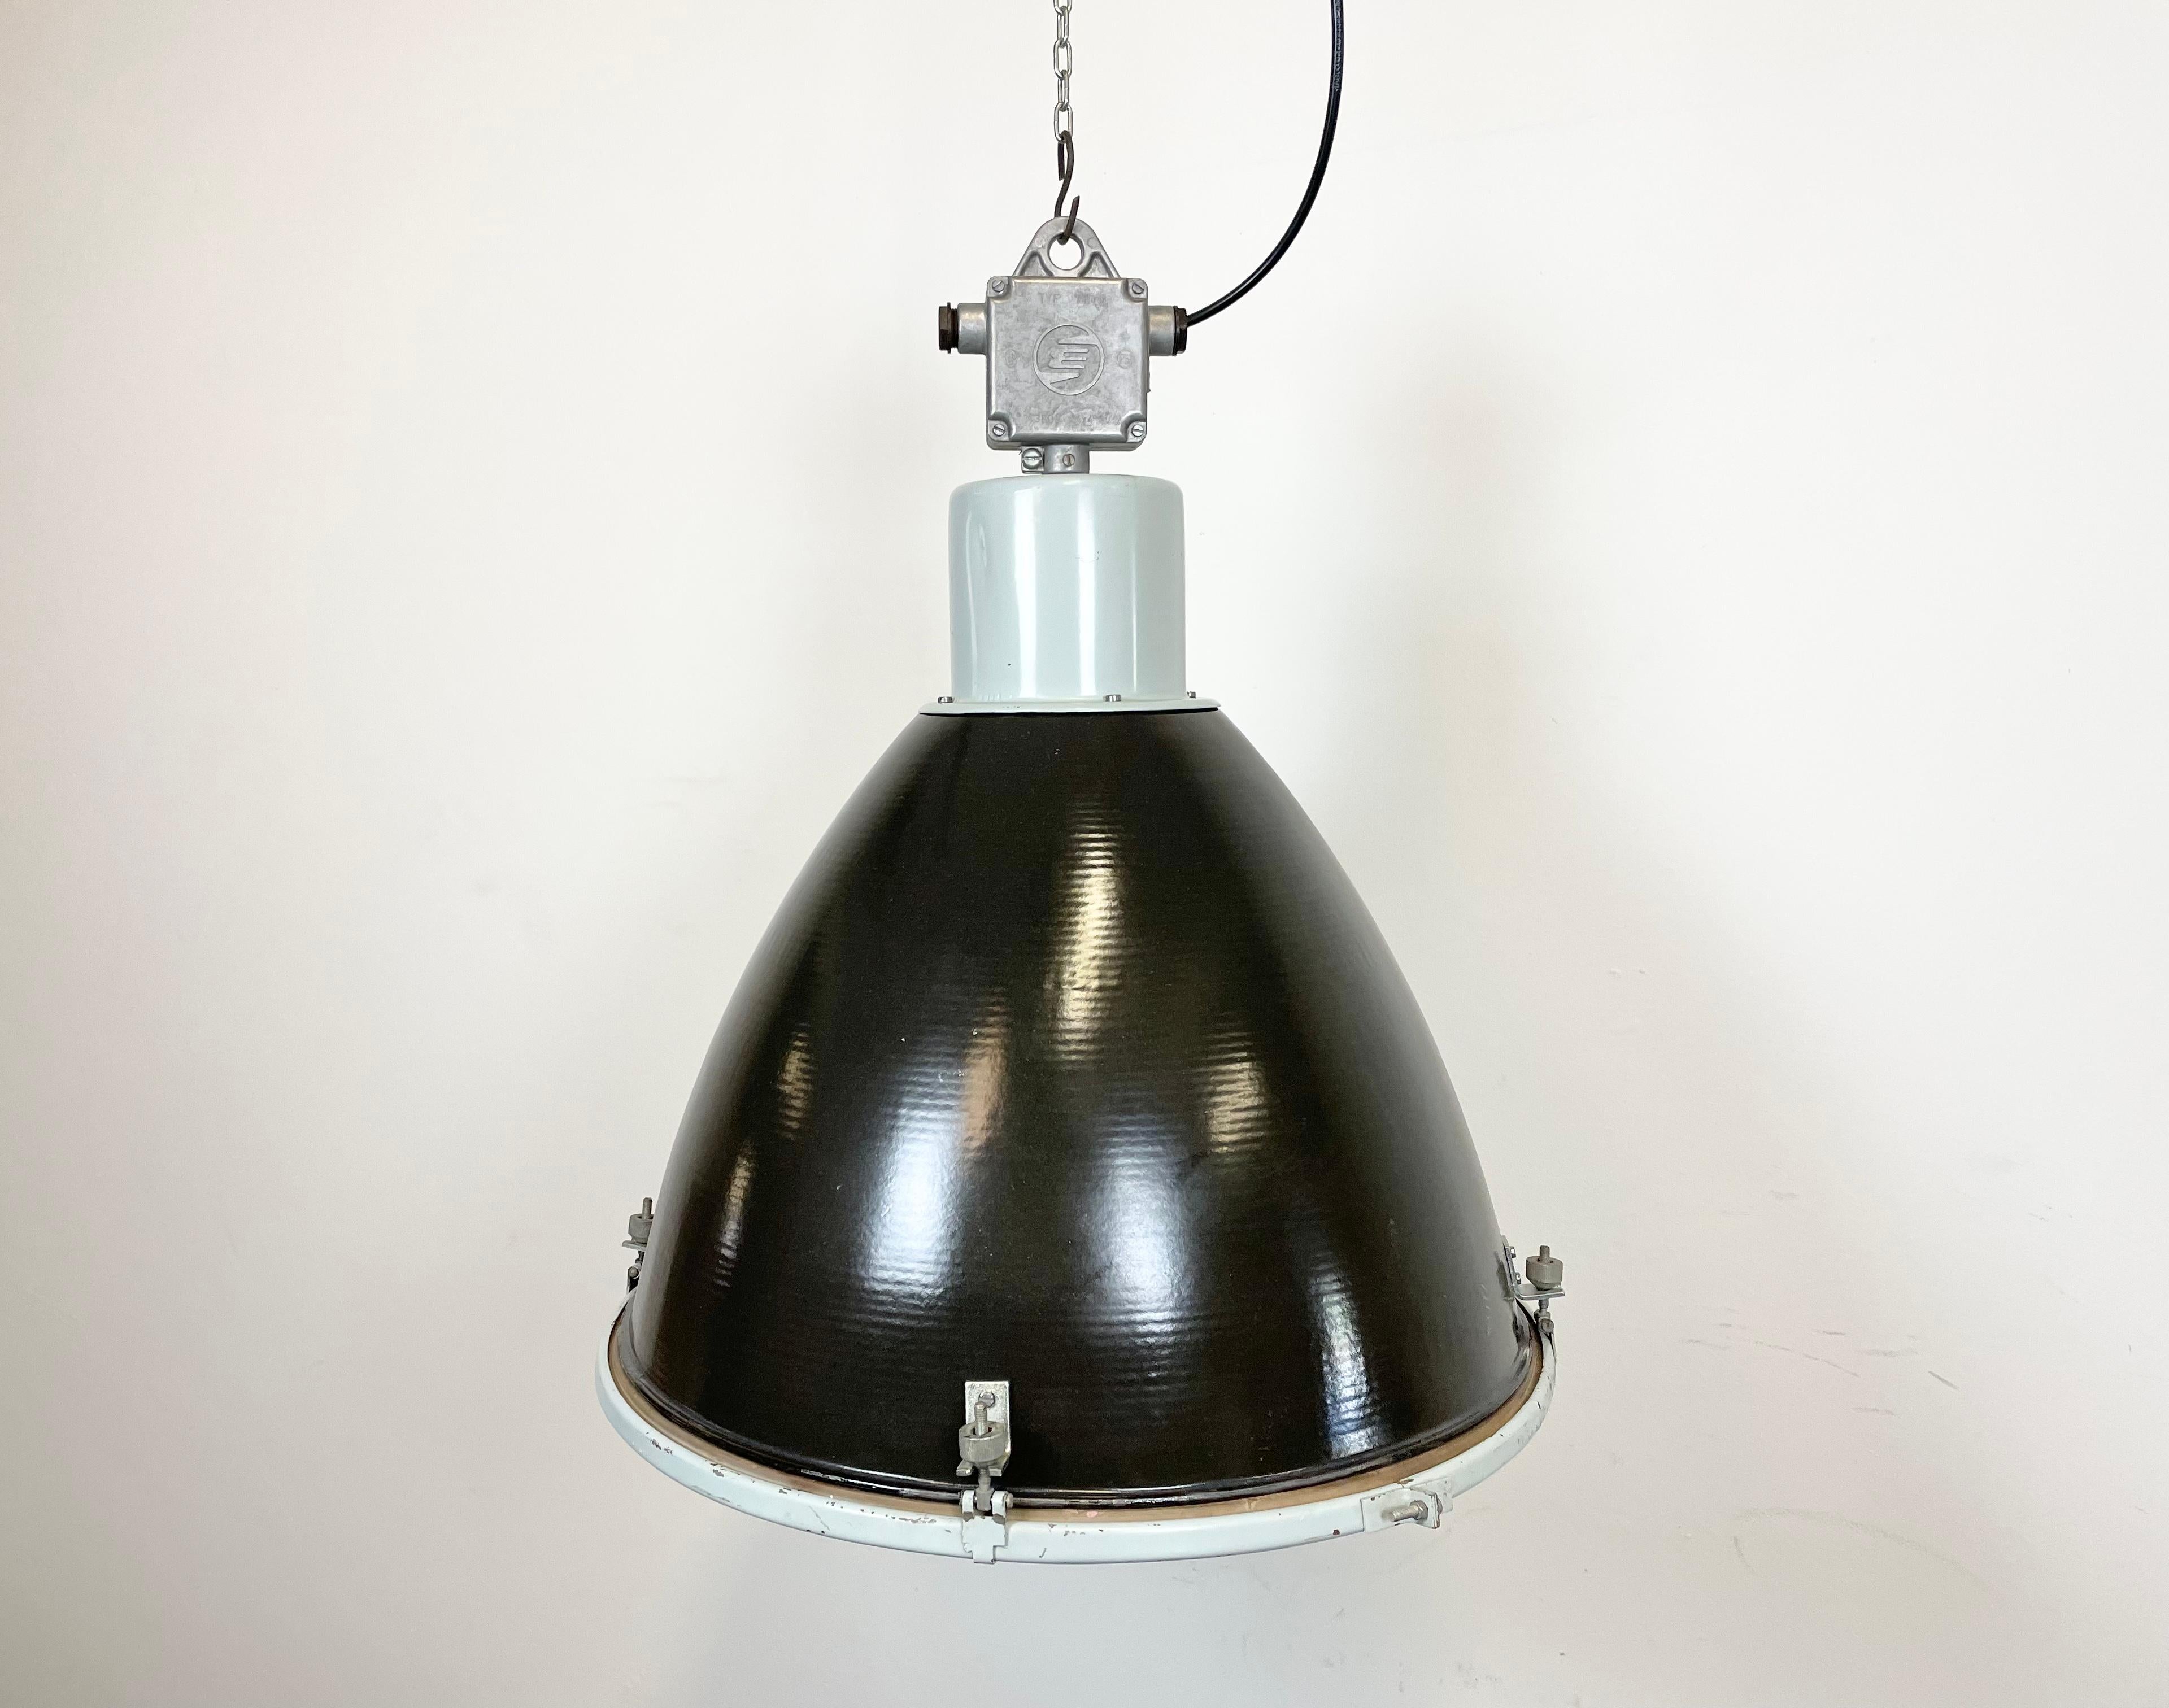 Industrial black enamel pendant lamp designed and produced by Elektrosvit in former Czechoslovakia during the 1960s. It features a grey metal top with cast aluminium box, a black enamel shade with white enamel interior and a clear glass cover.
New